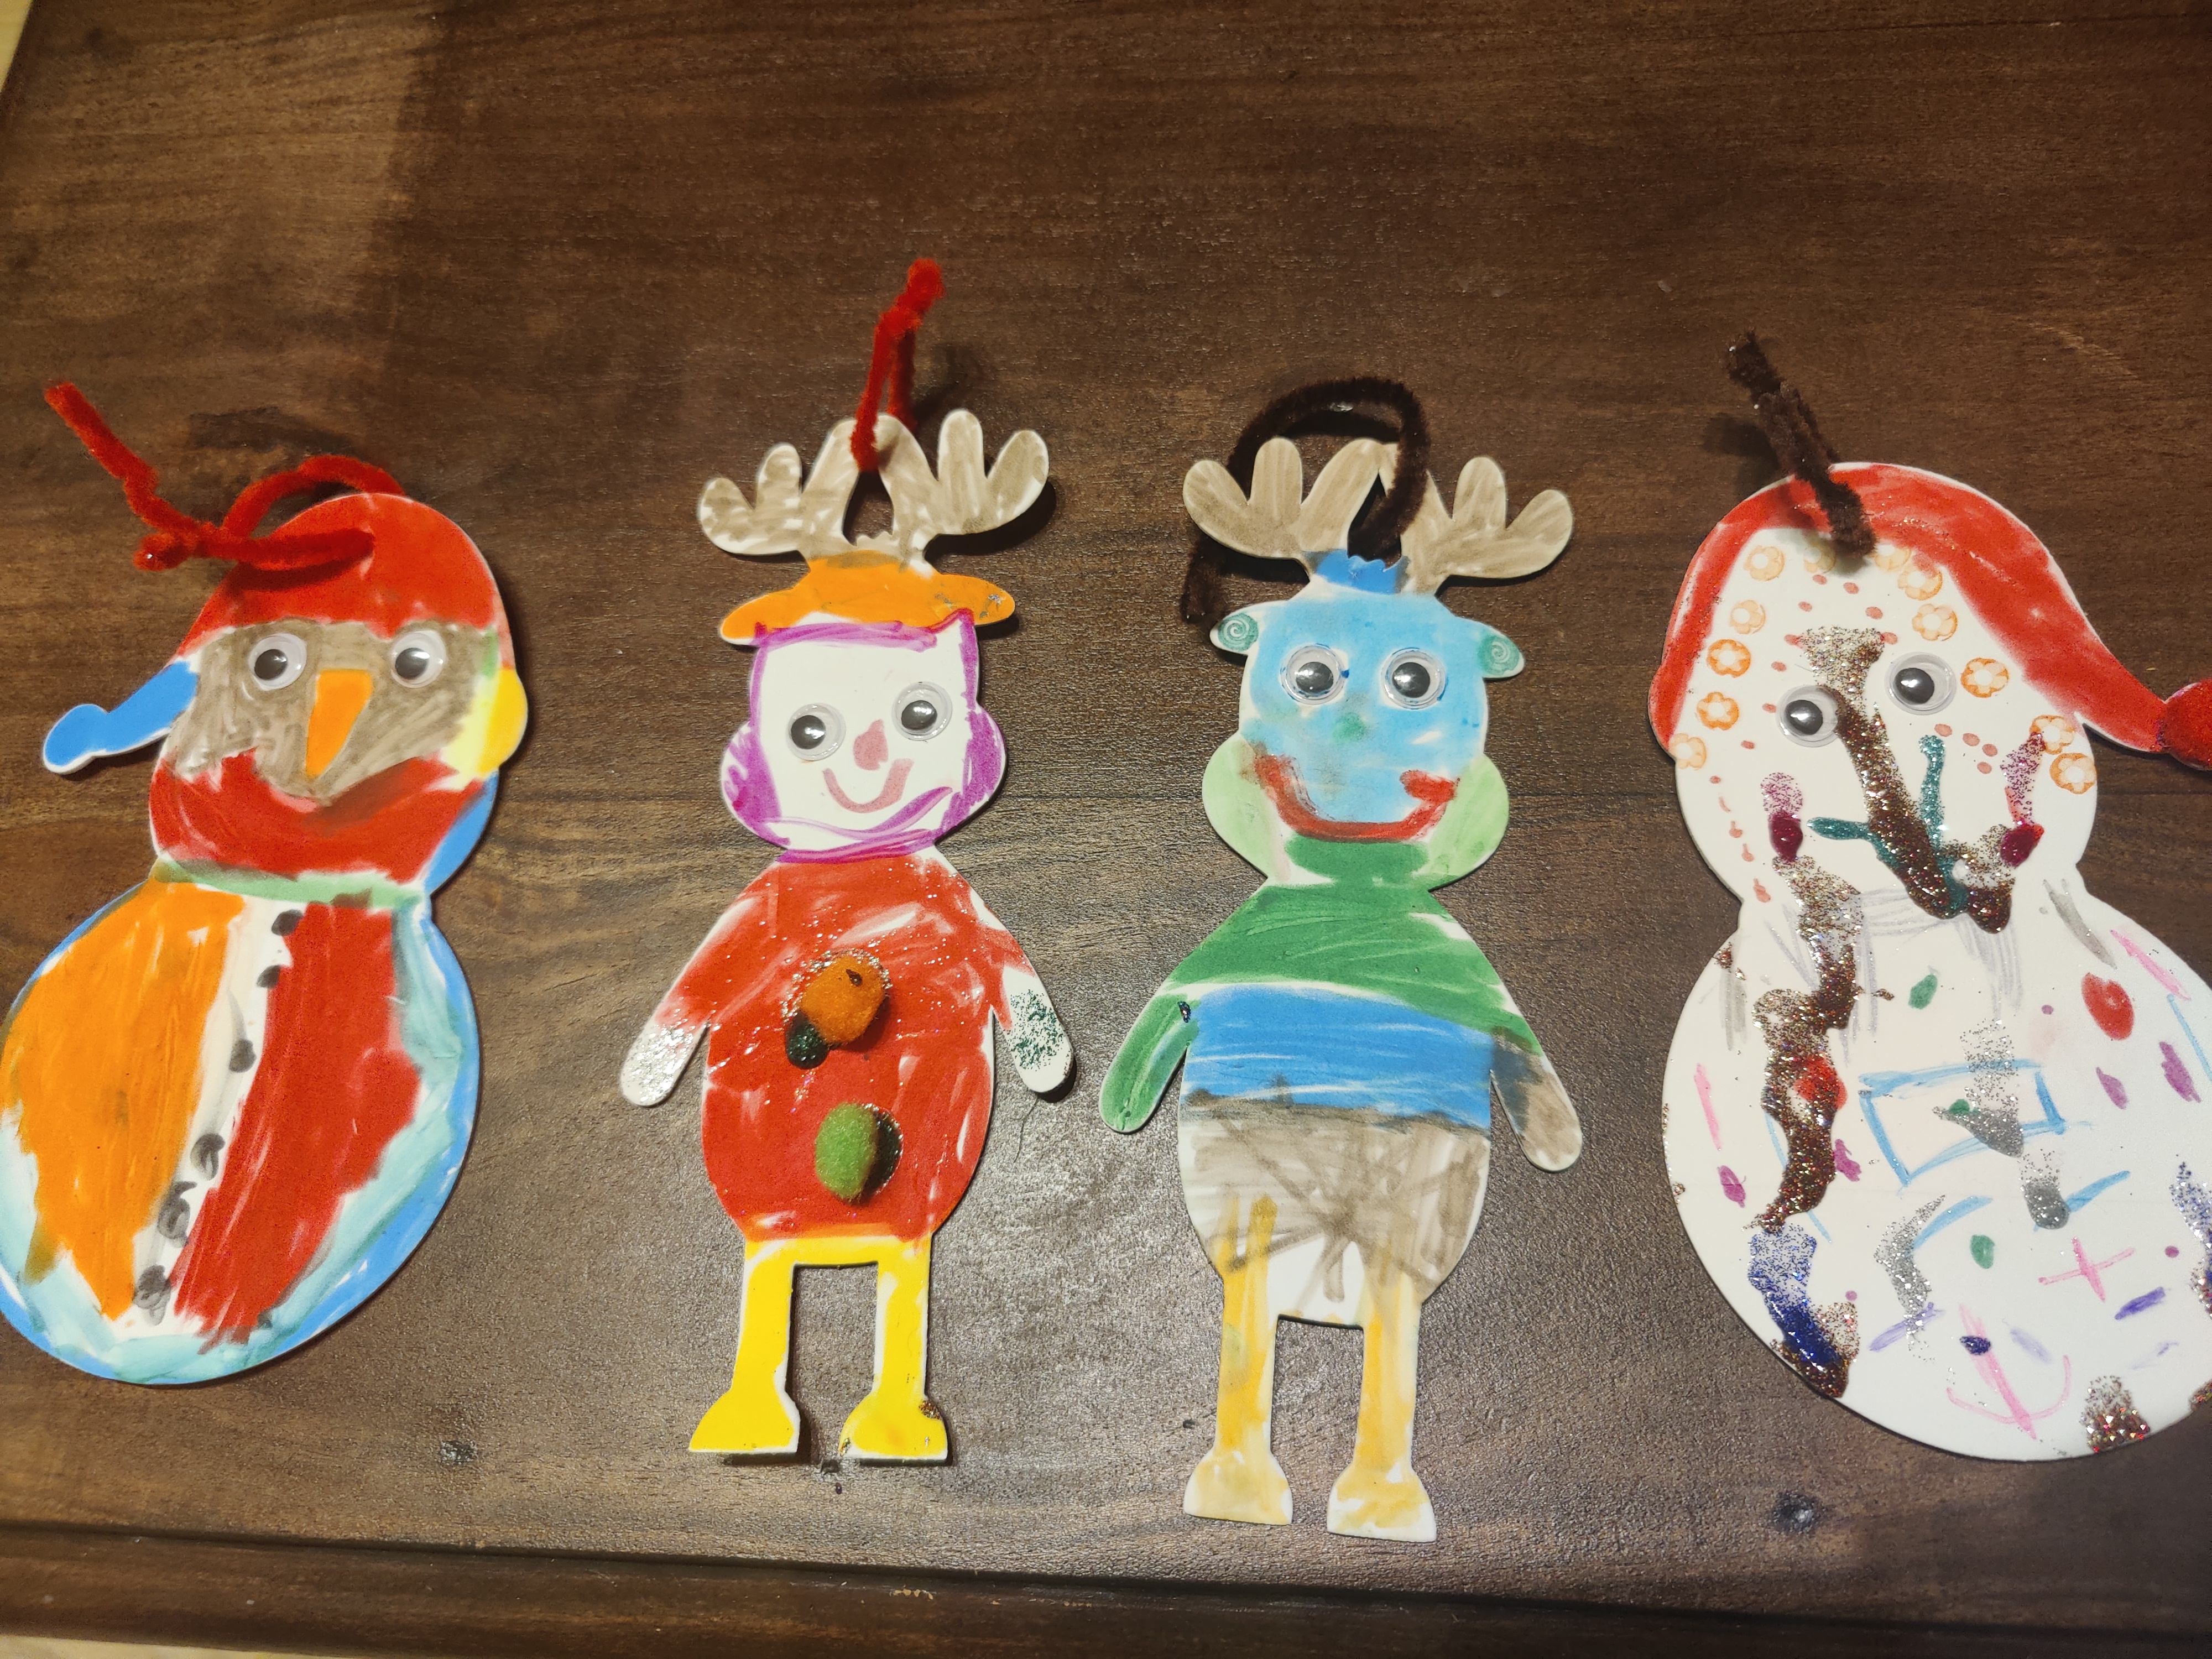 'Homemade Christmas decorations' by Max&Mia Santa little helpers. () from Wexford